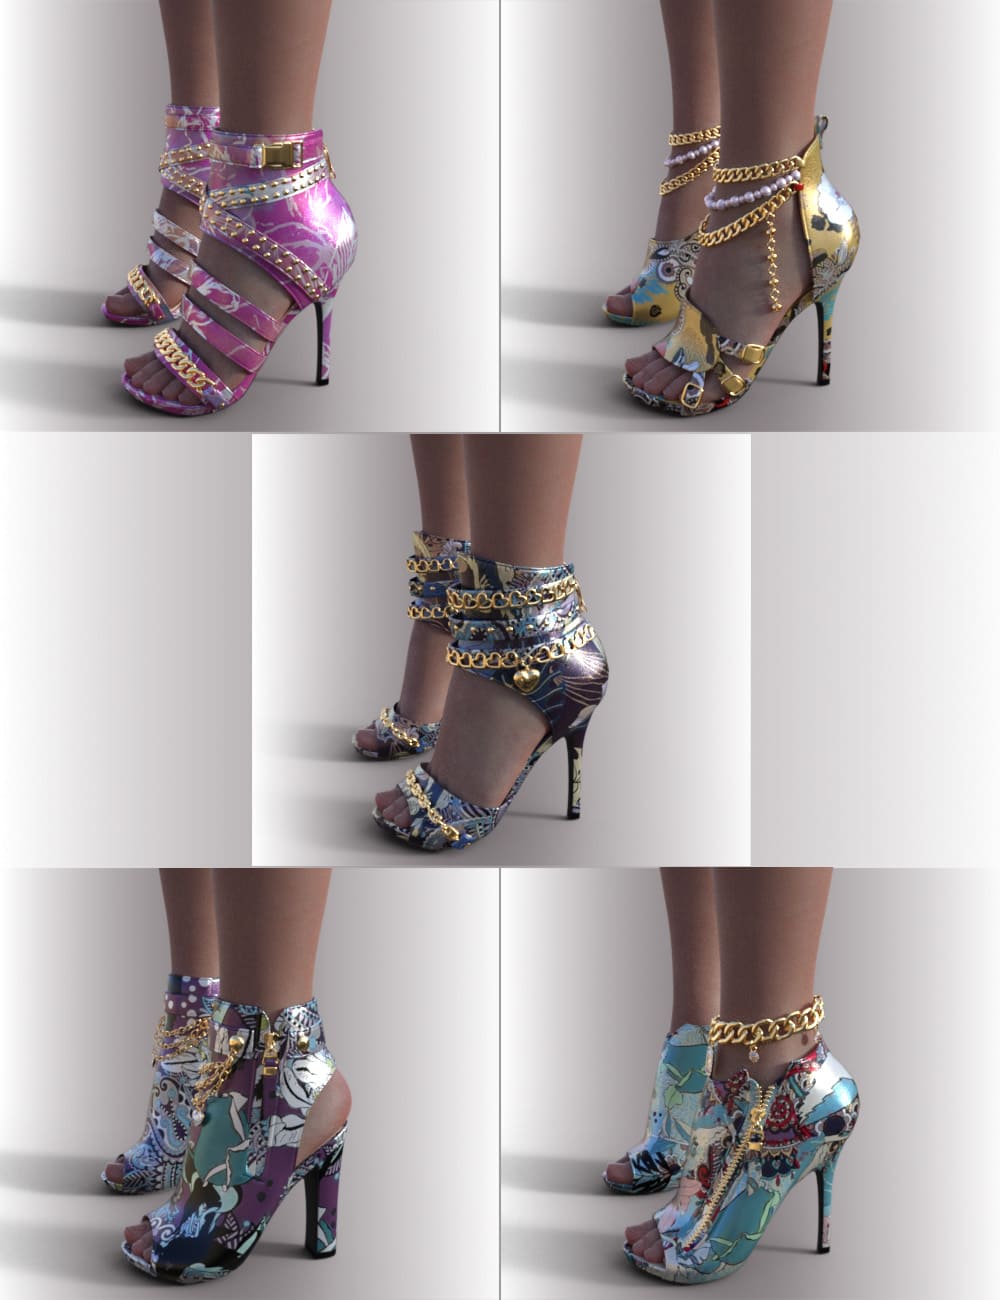 Shoes for Favorite Outfits for Genesis 9_DAZ3D下载站